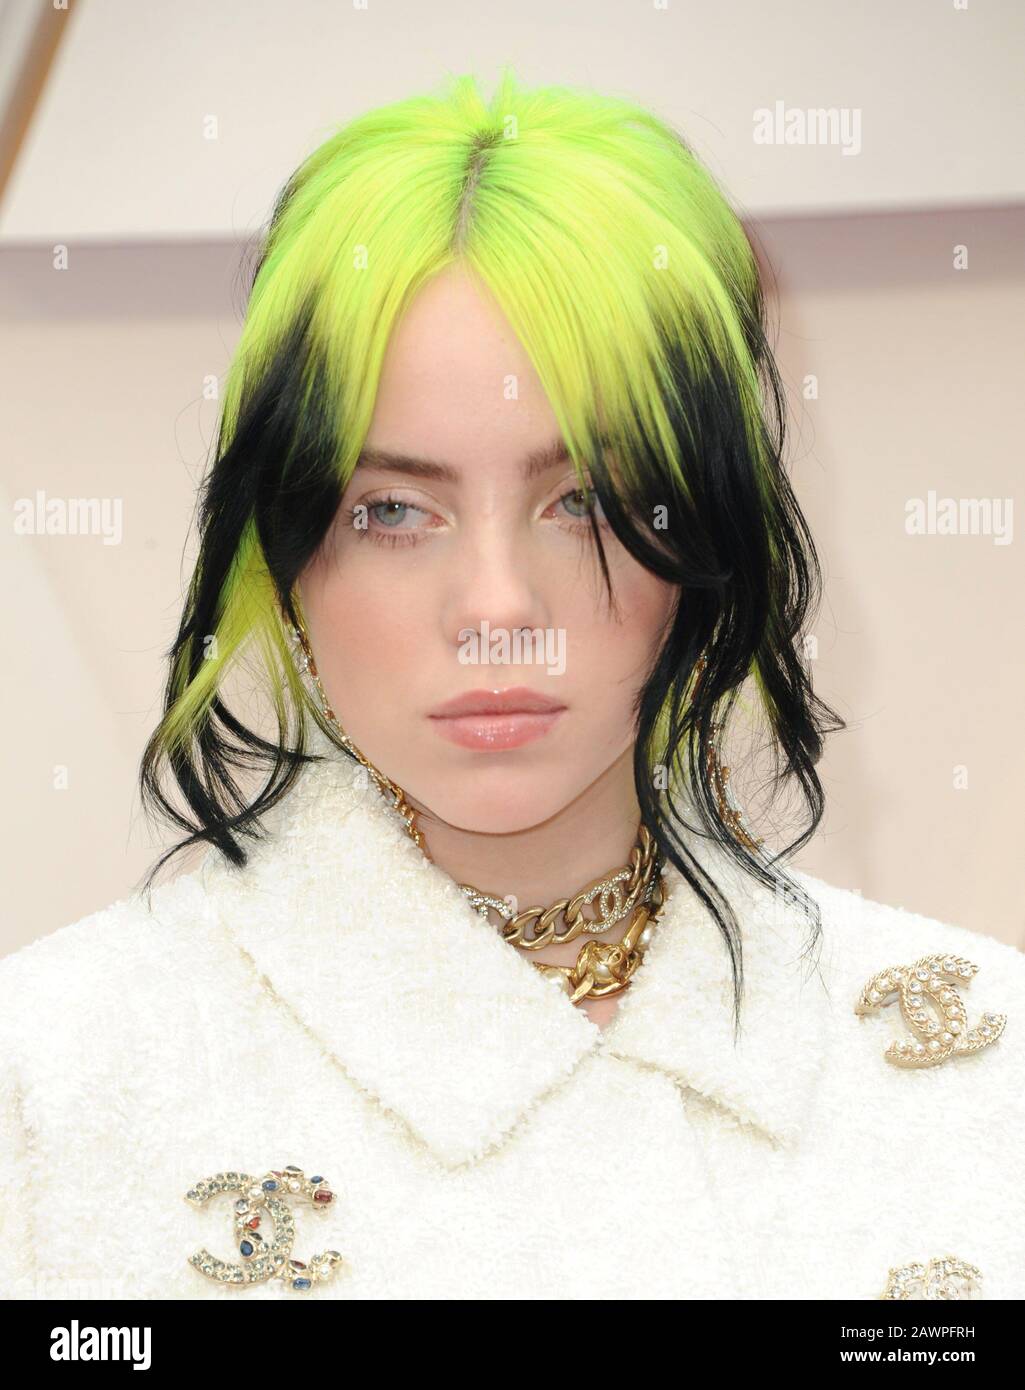 Los Angeles, CA. 9th Feb, 2020. Billie Eilish at arrivals for The 92nd Academy Awards - Arrivals 2, The Dolby Theatre at Hollywood and Highland Center, Los Angeles, CA February 9, 2020. Credit: Elizabeth Goodenough/Everett Collection/Alamy Live News Stock Photo